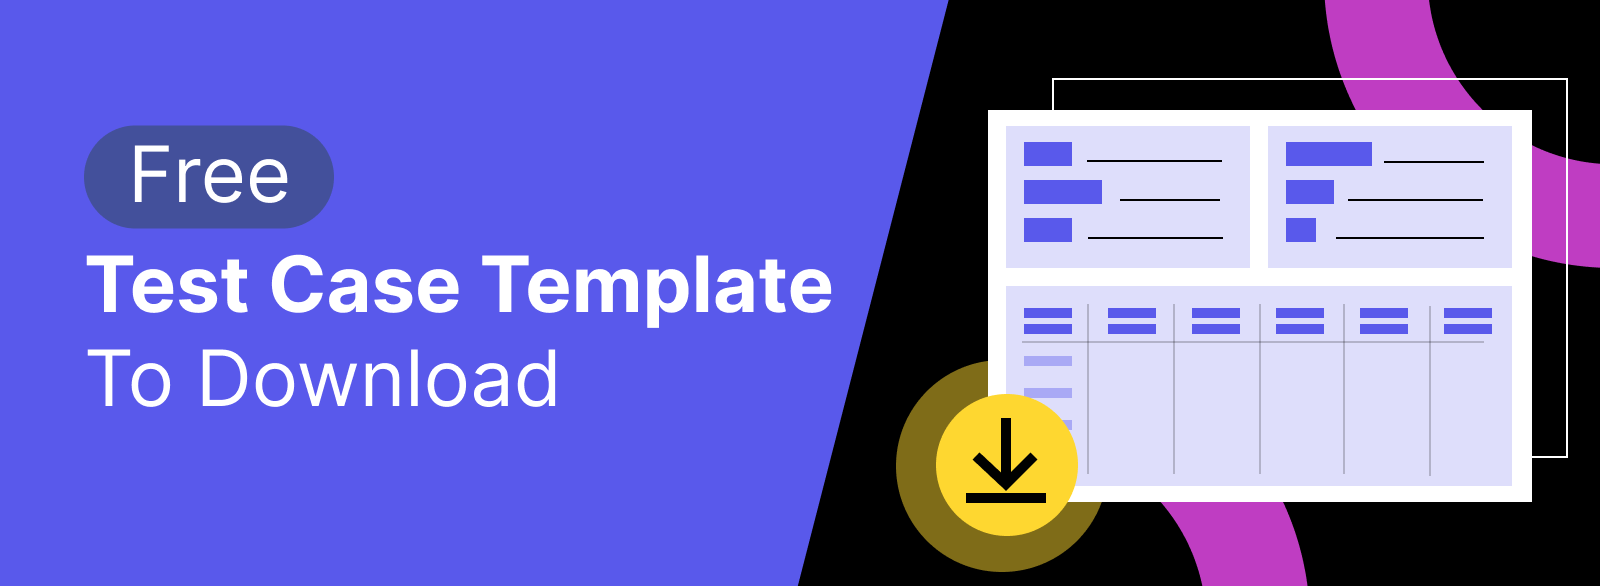 free test case template brief to download